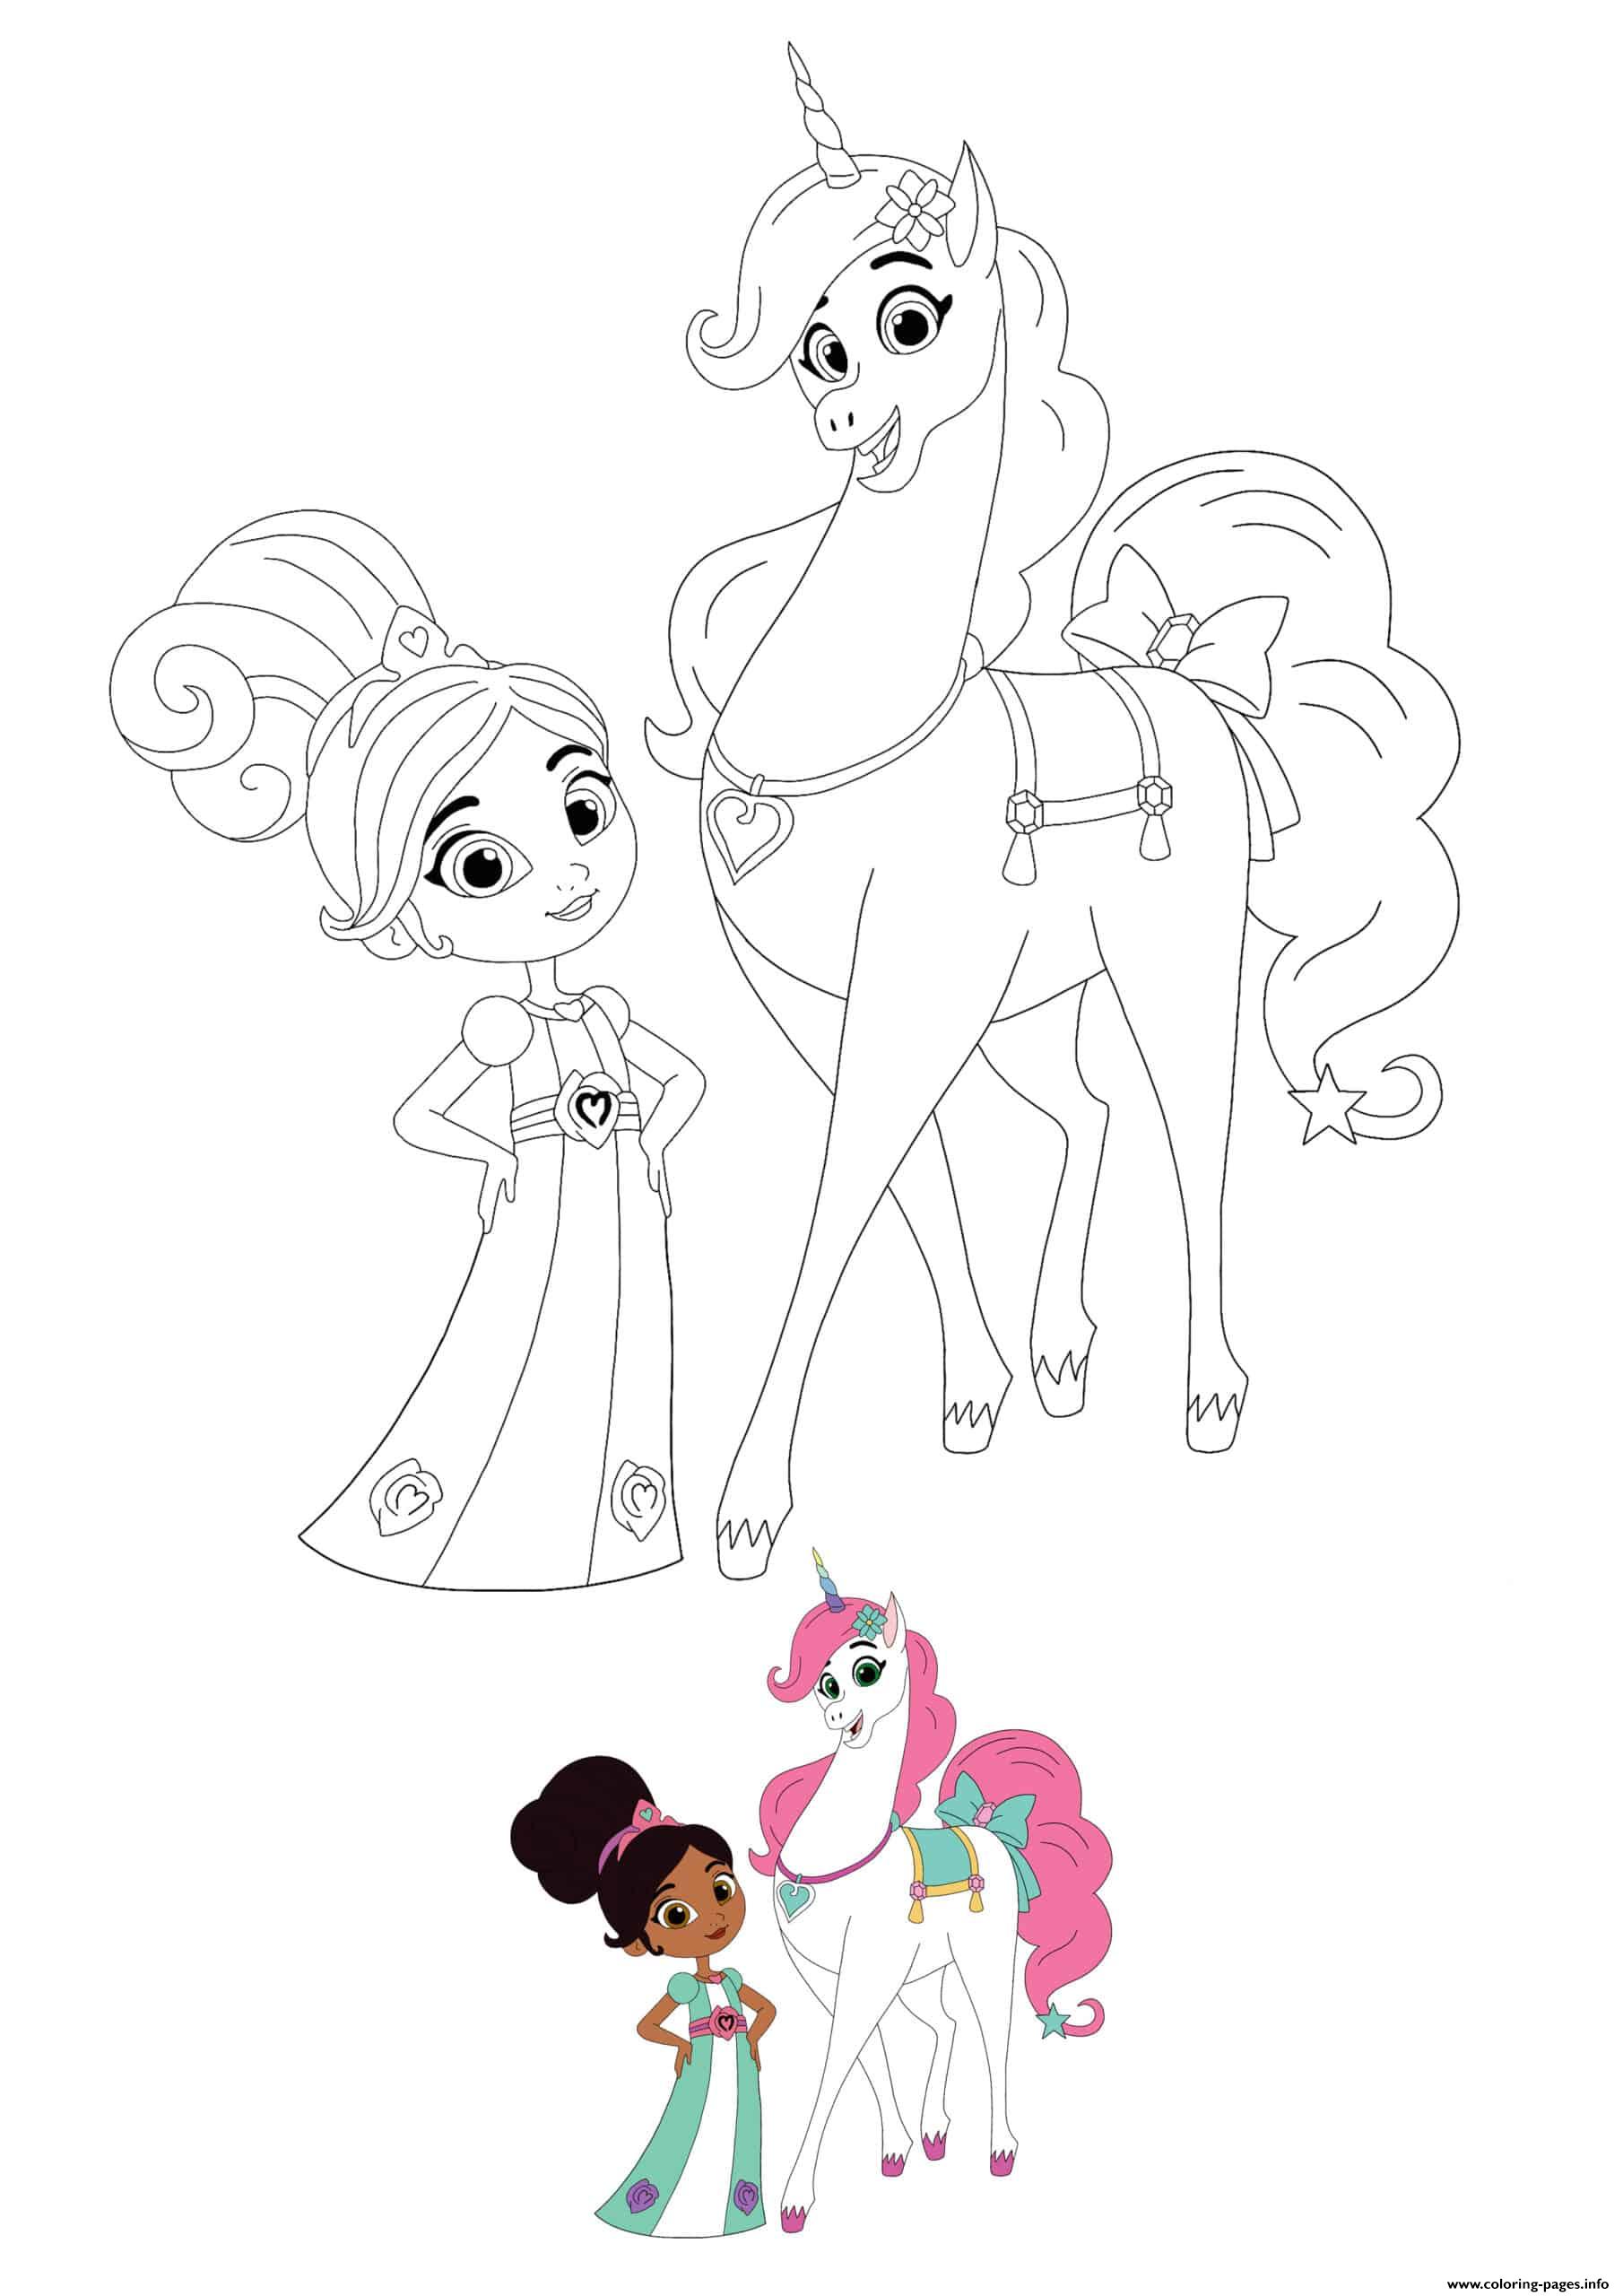 Nella The Princess Knight Coloring Pages Printable